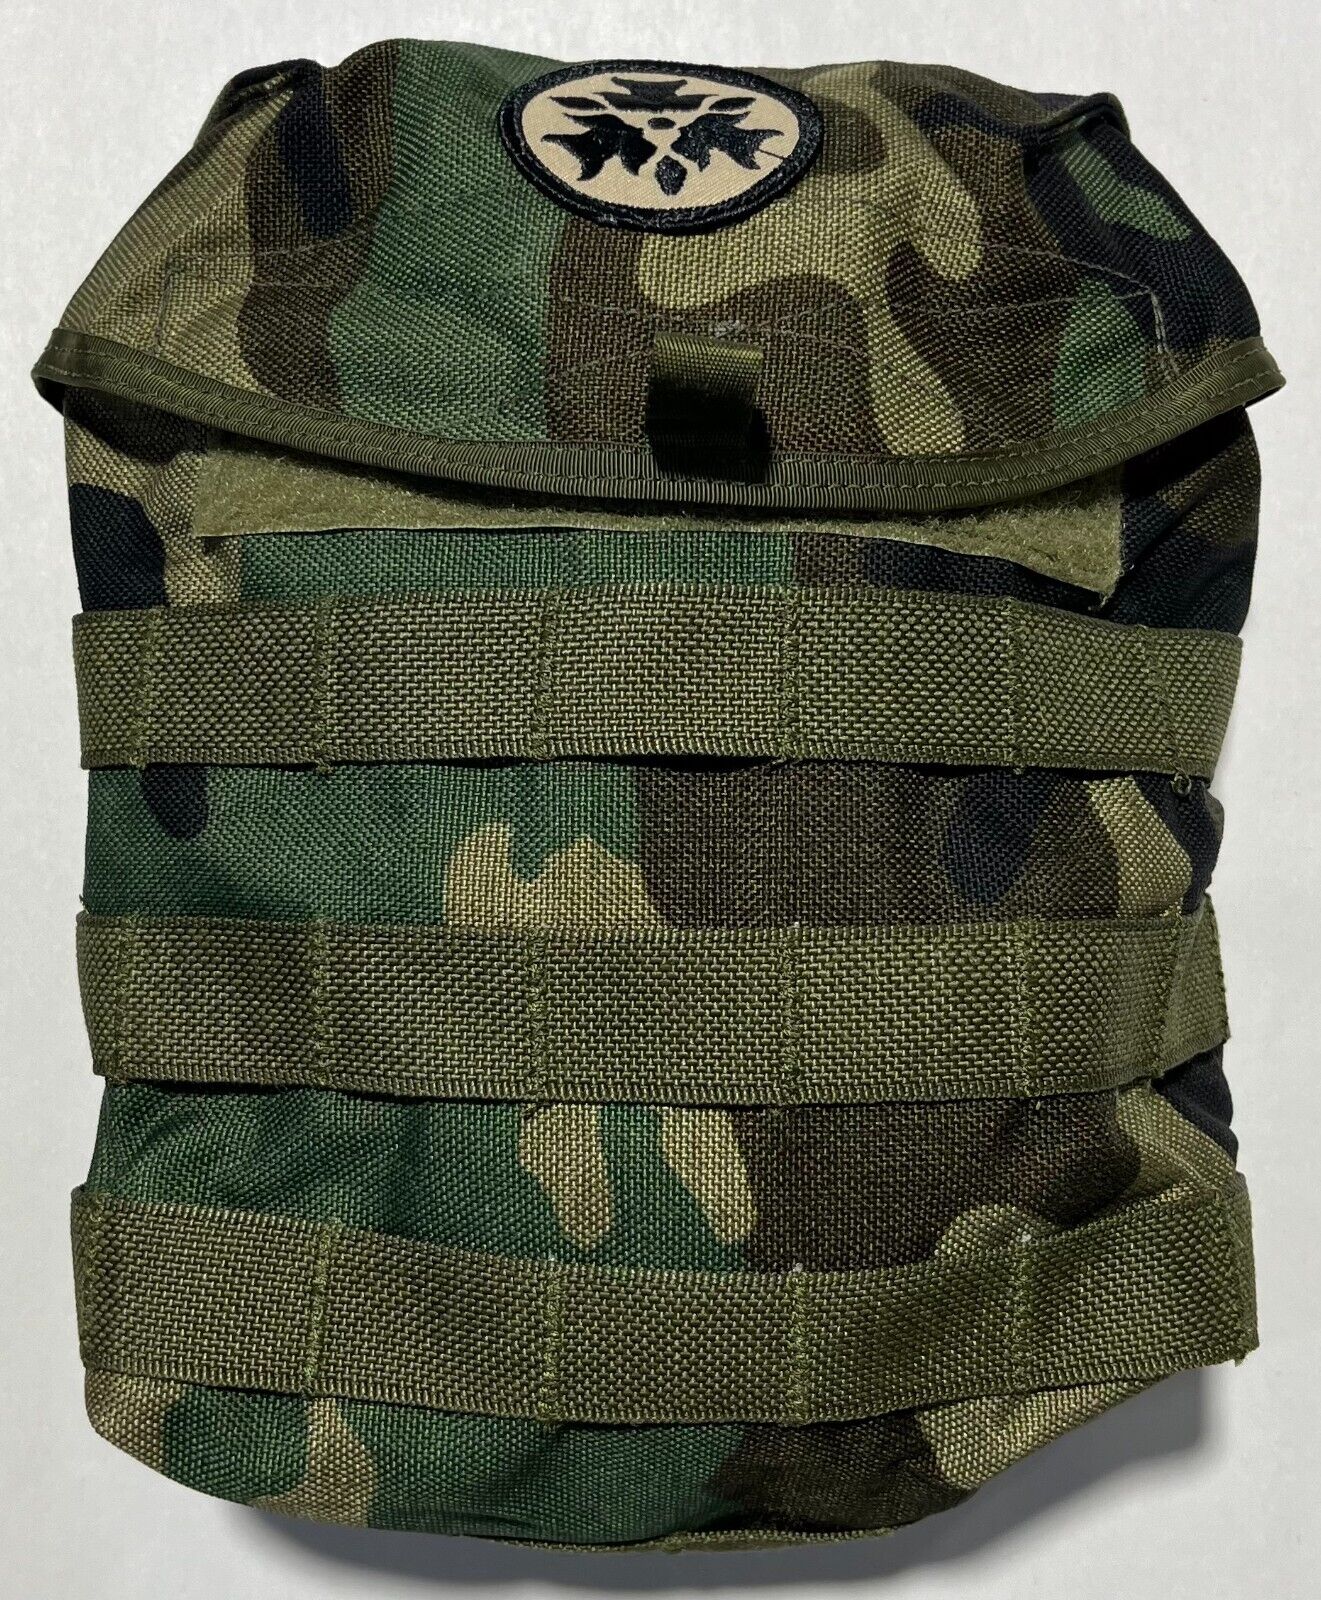 MAG DUMP POUCH Multi Purpose MOLLE MALICE (3) Woodland Camouflage PPM USA